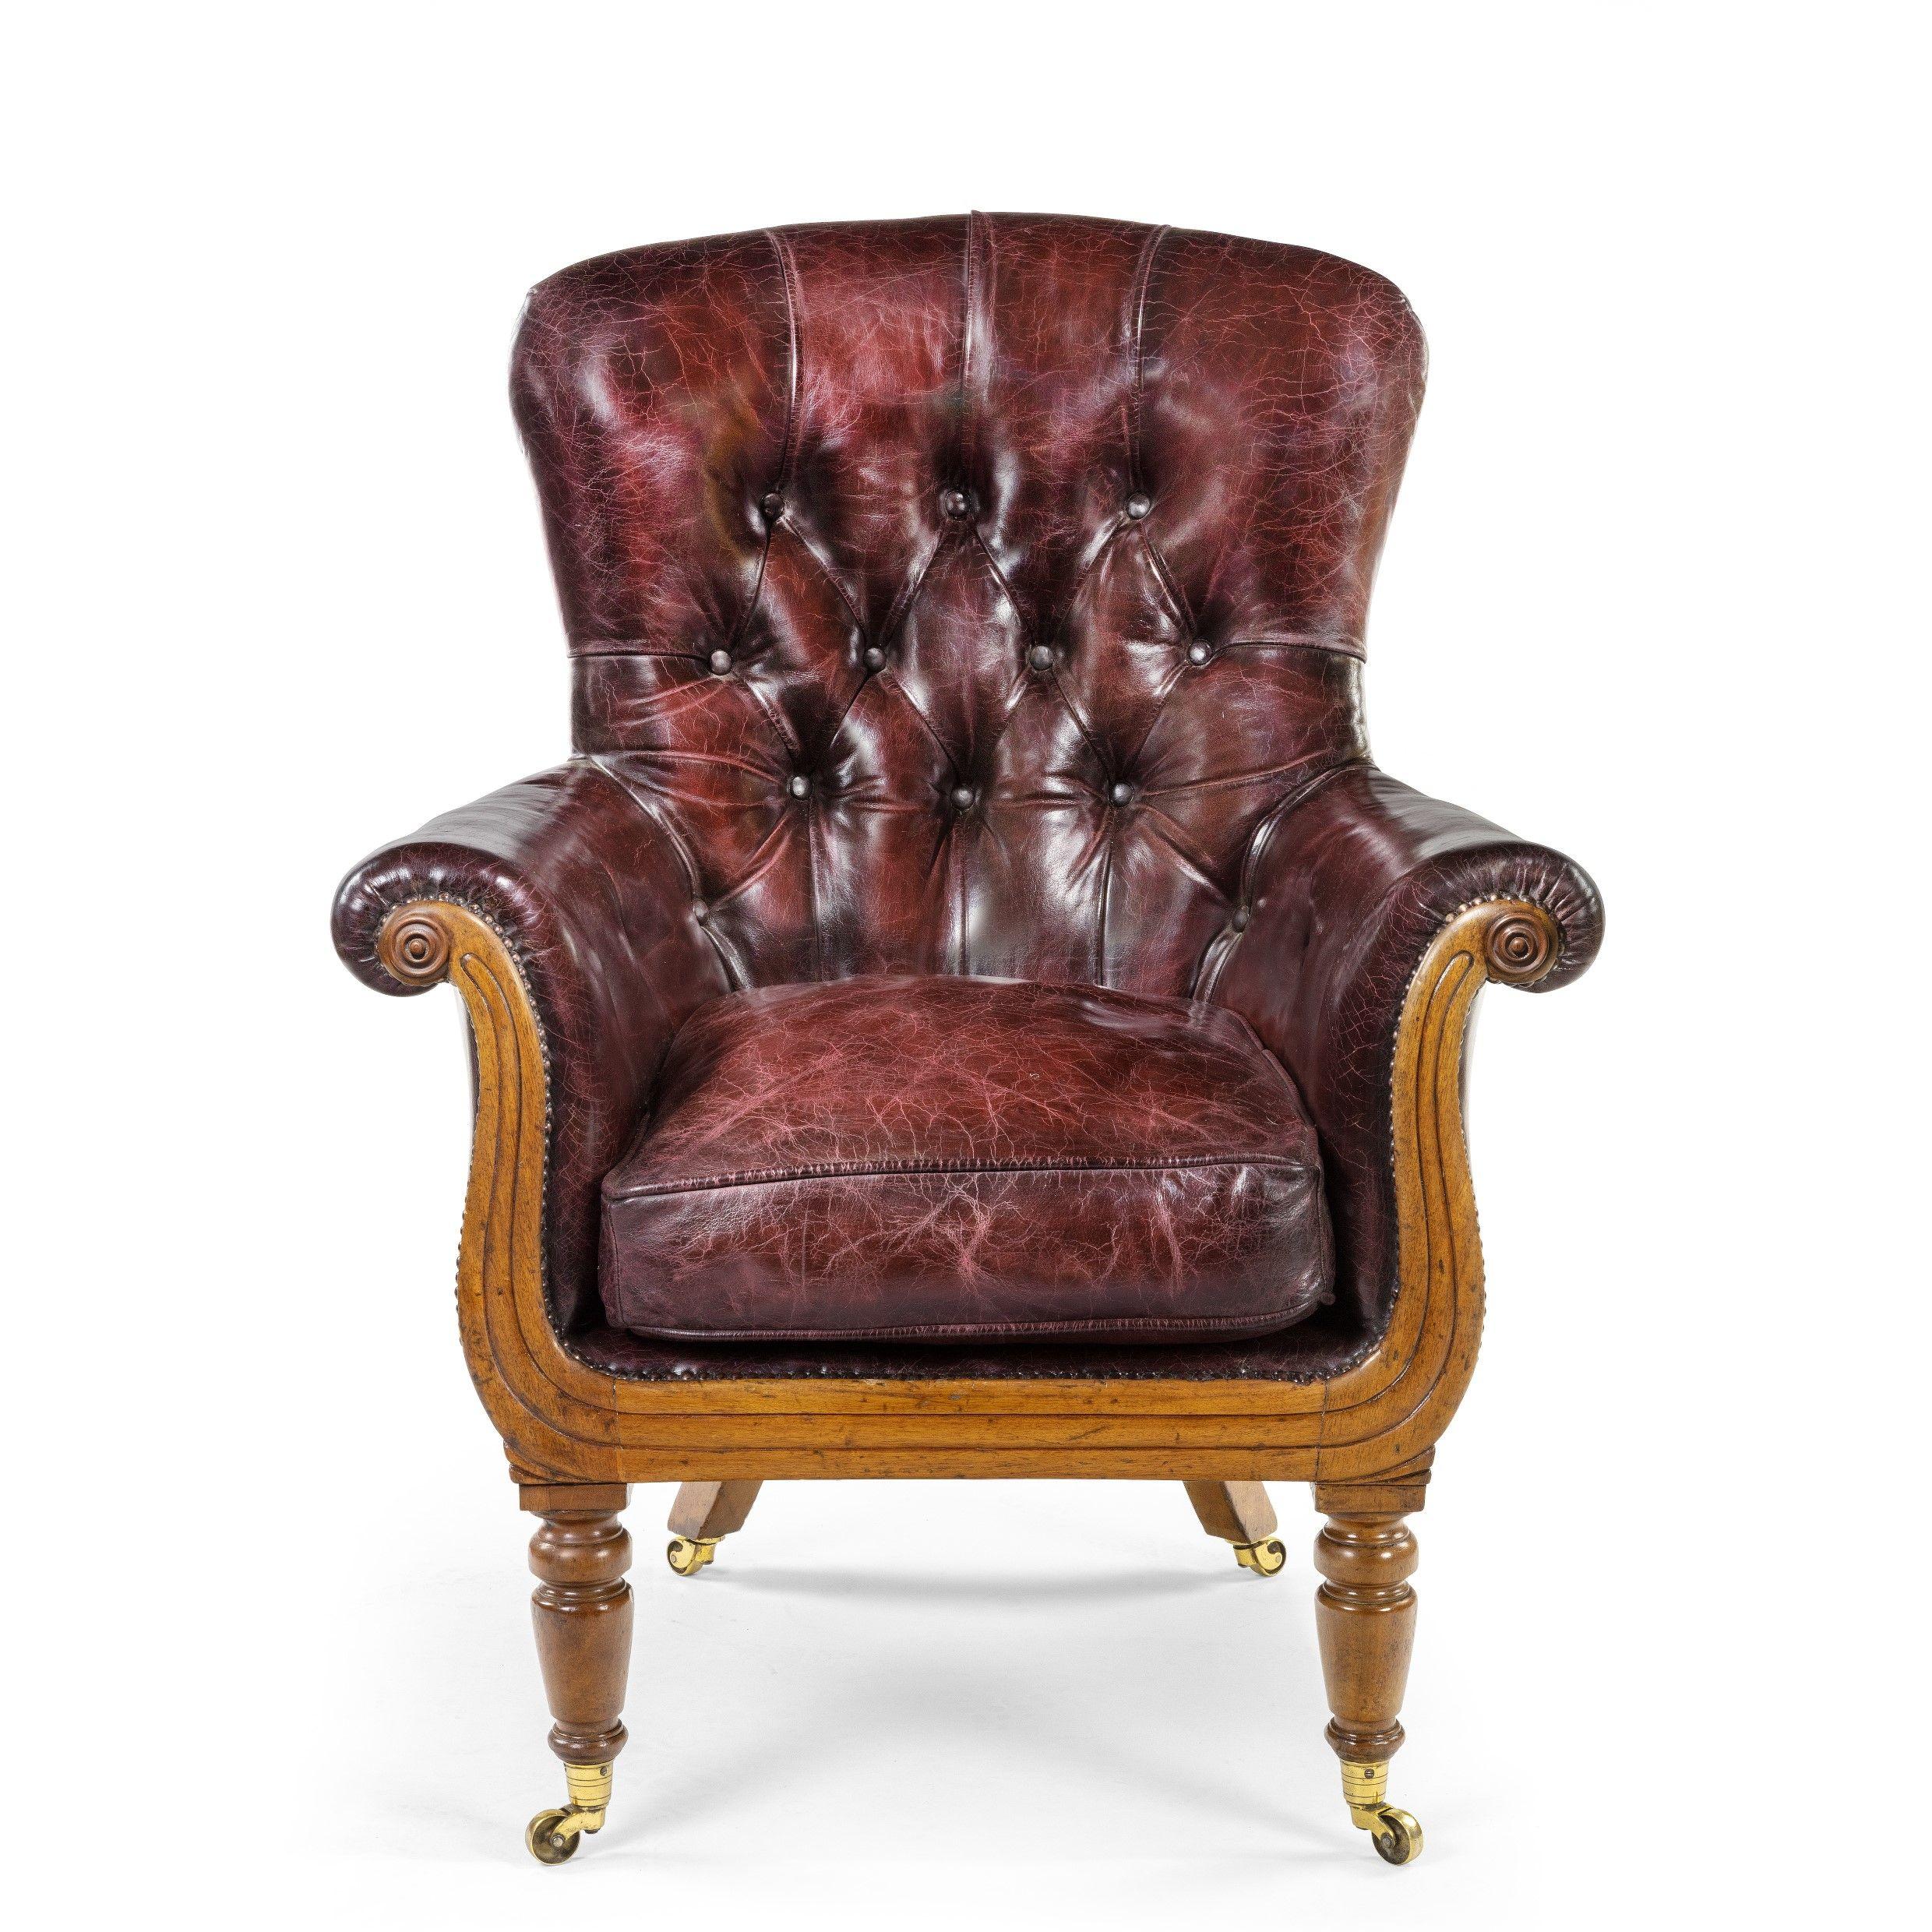 William IV Shaped Mahogany Library Chair In Good Condition For Sale In Lymington, Hampshire